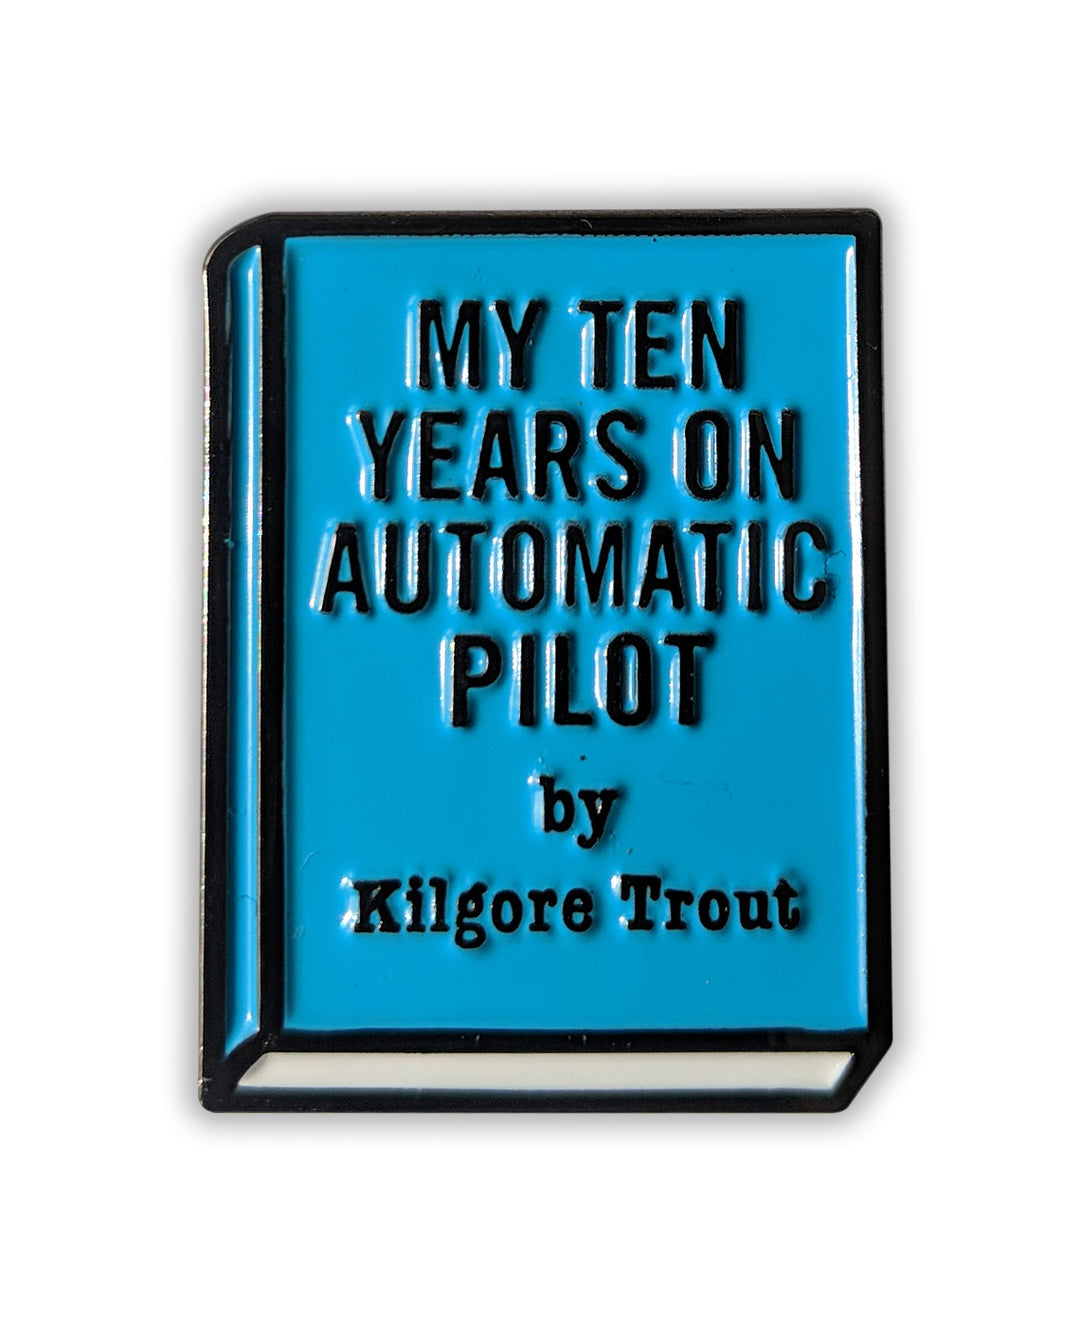 Kilgore Trout "My Ten Years On Automatic Pilot" Pin "My Ten Years On Automatic Pilot"